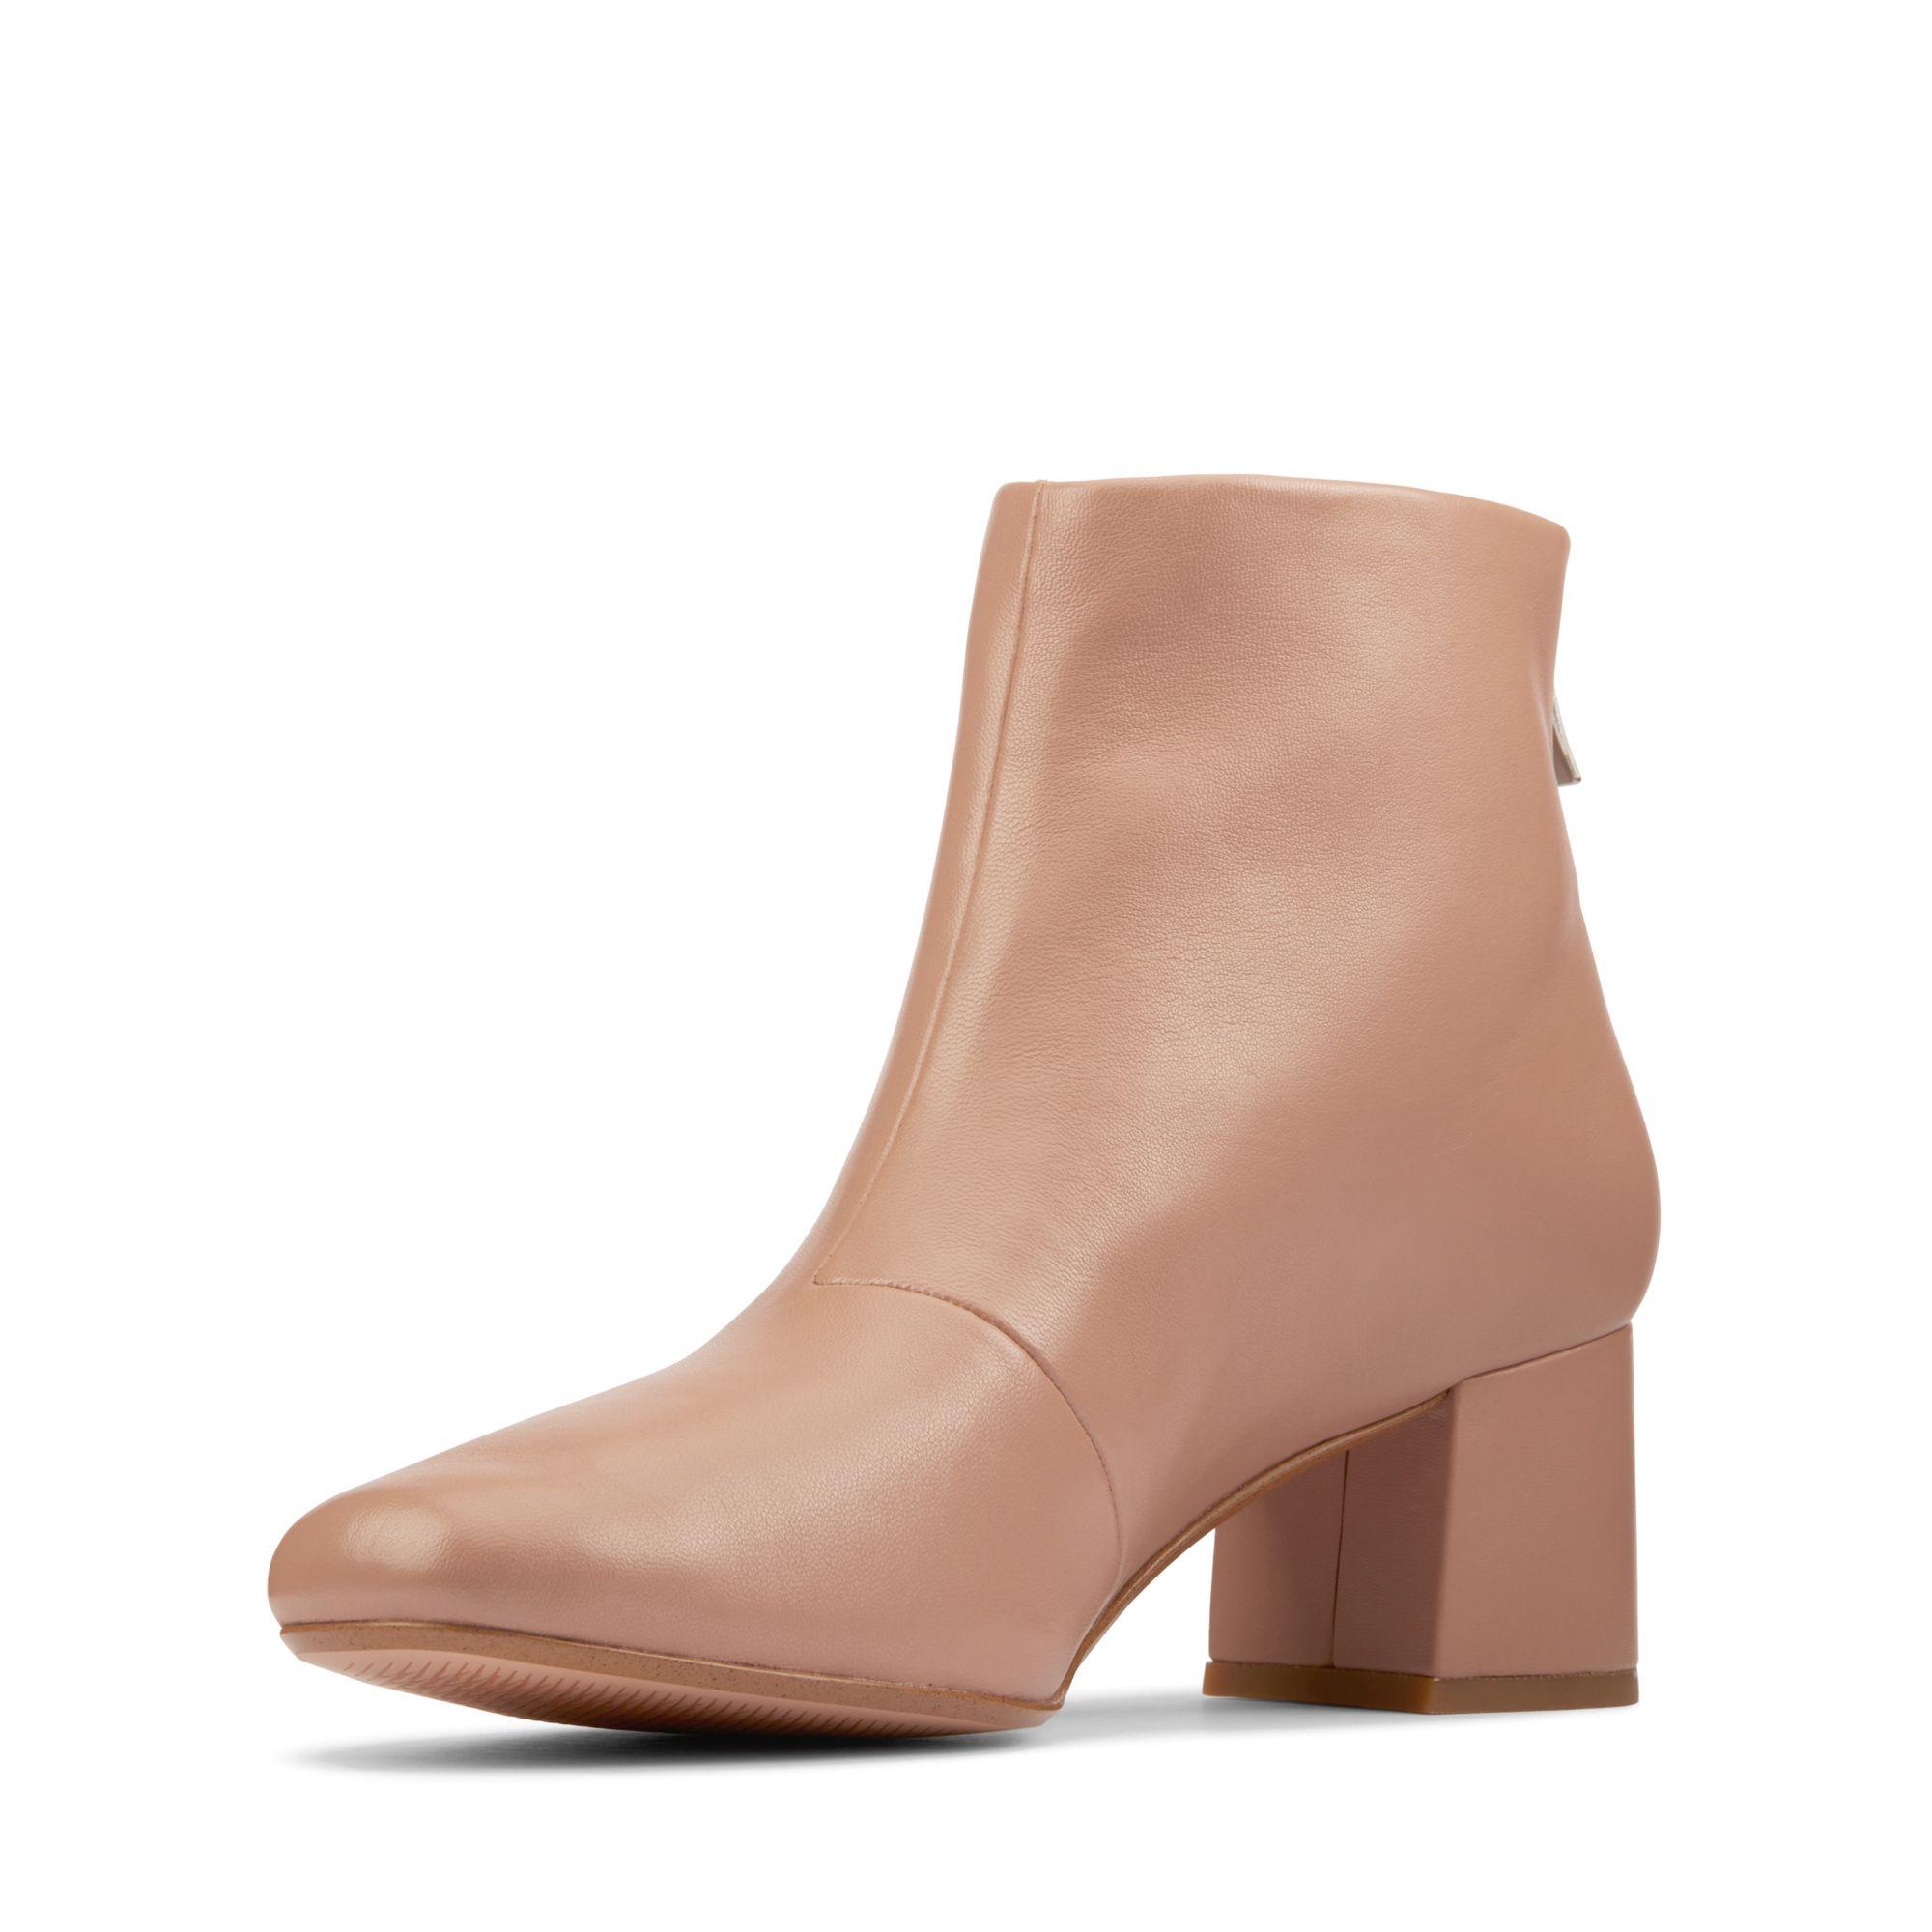 Clarks Sheer 55 Zip Leather Heeled Ankle Boots in Nude (Brown) - Save 23% |  Lyst